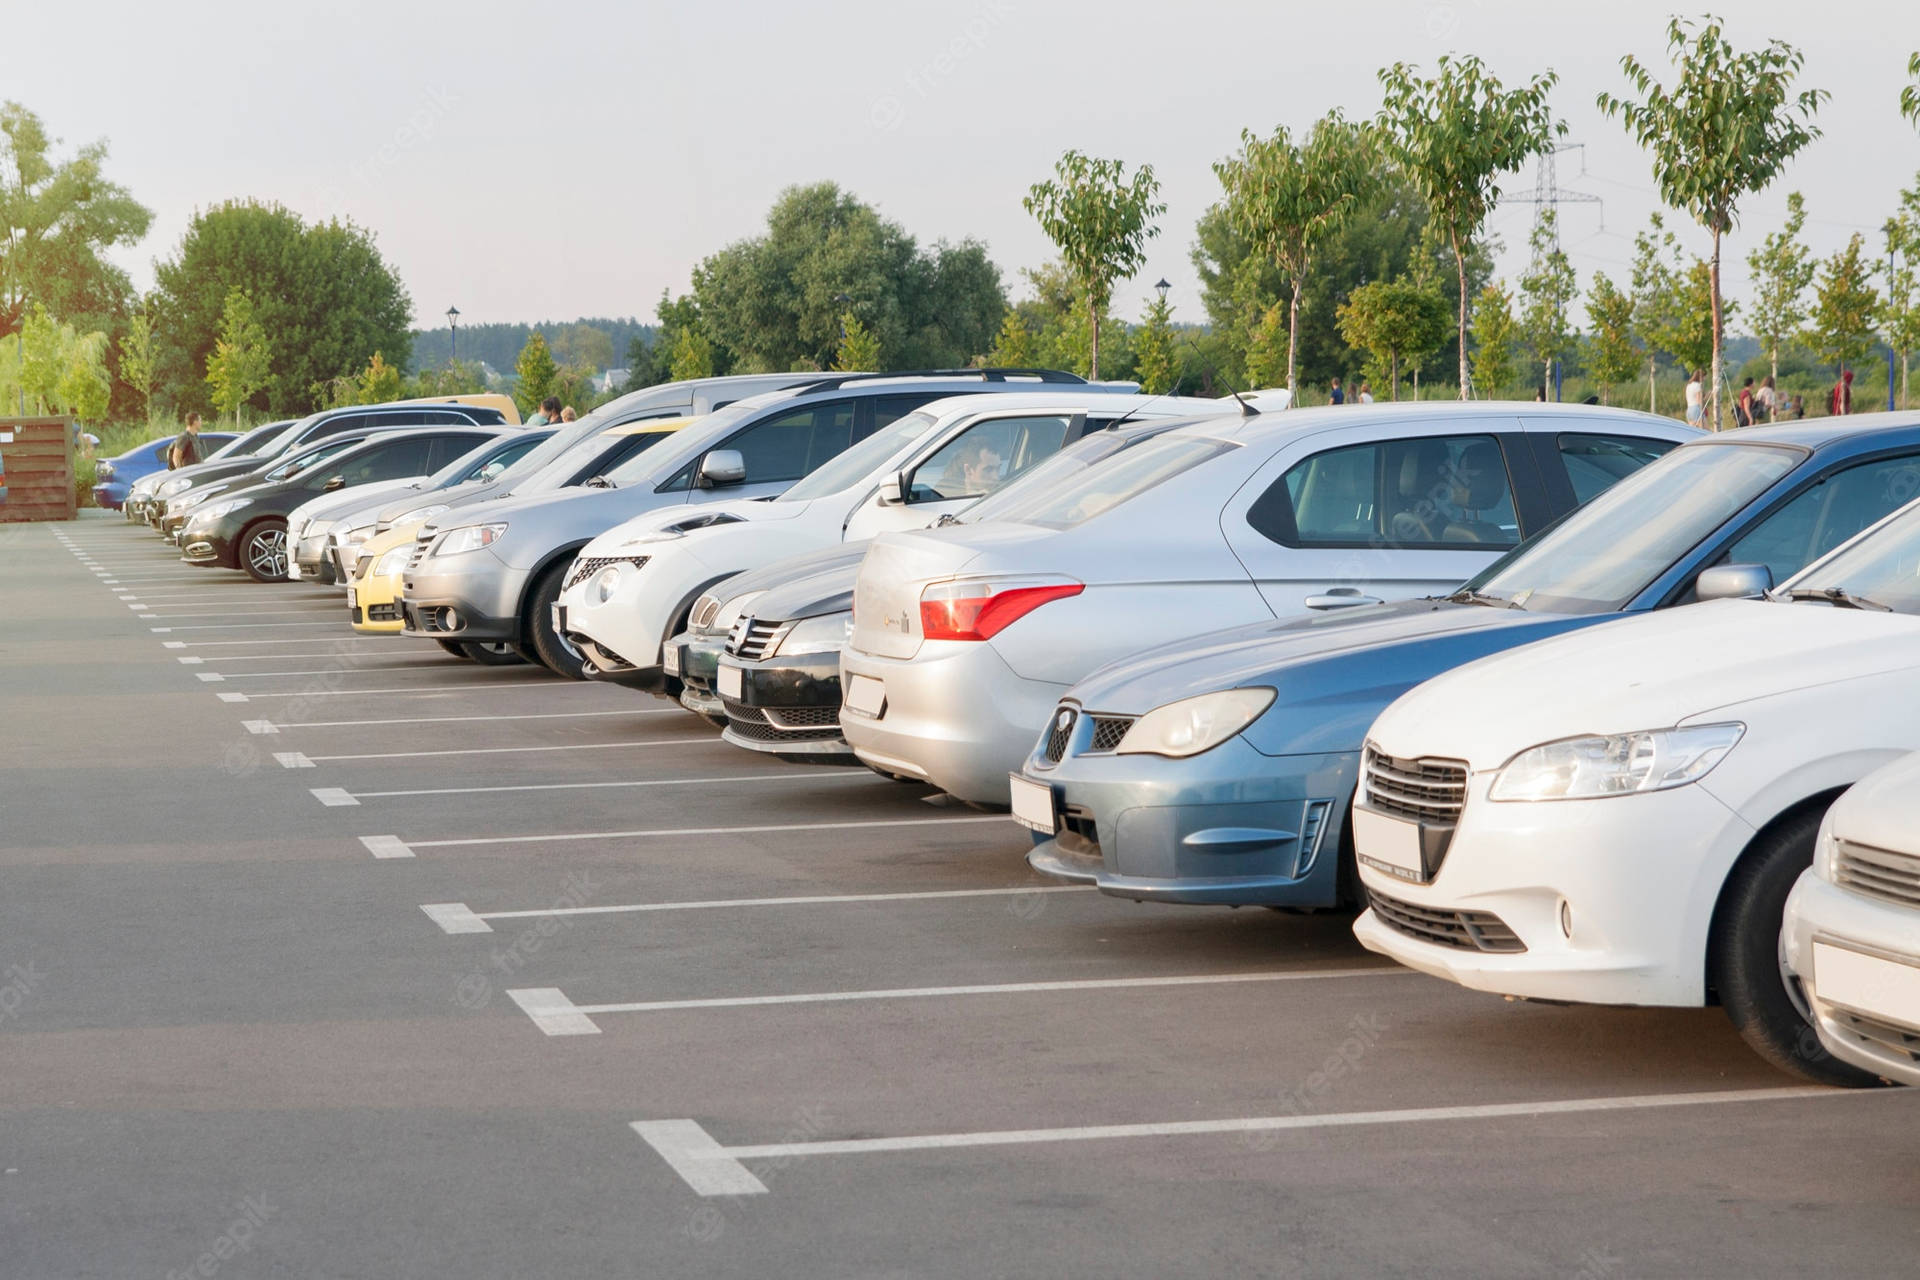 Parking Space With Lined-Up Cars Wallpaper